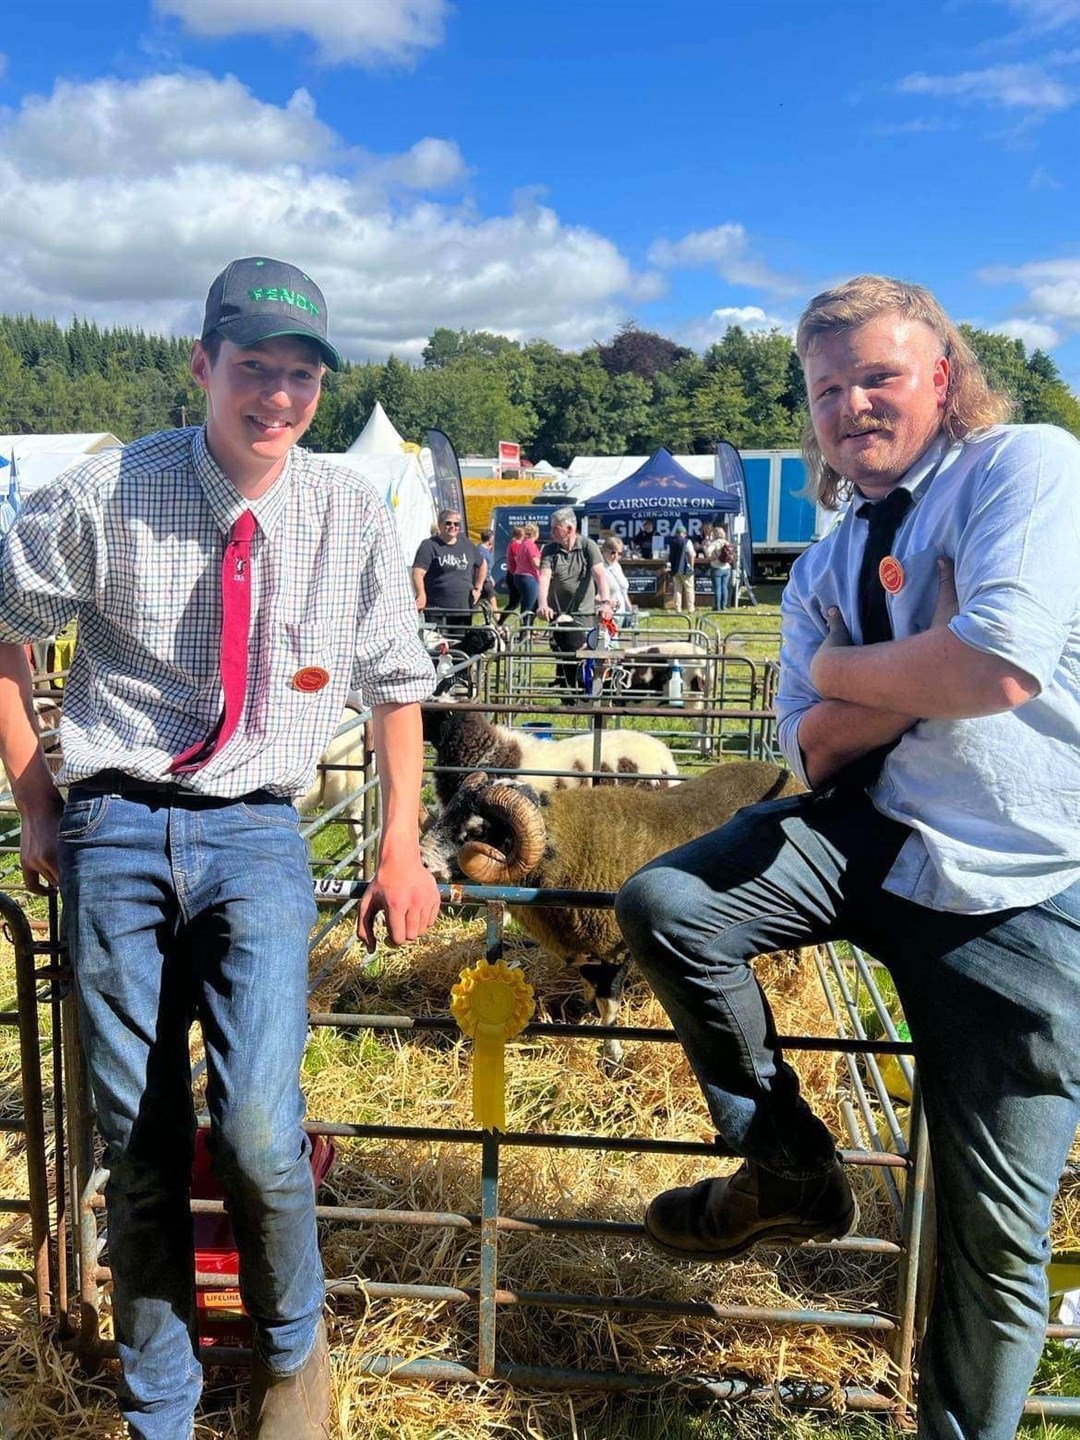 Hayden Taylor-Ramsay (Timmy) with employer Alastair Davidson (right) at the Grantown Show last year.